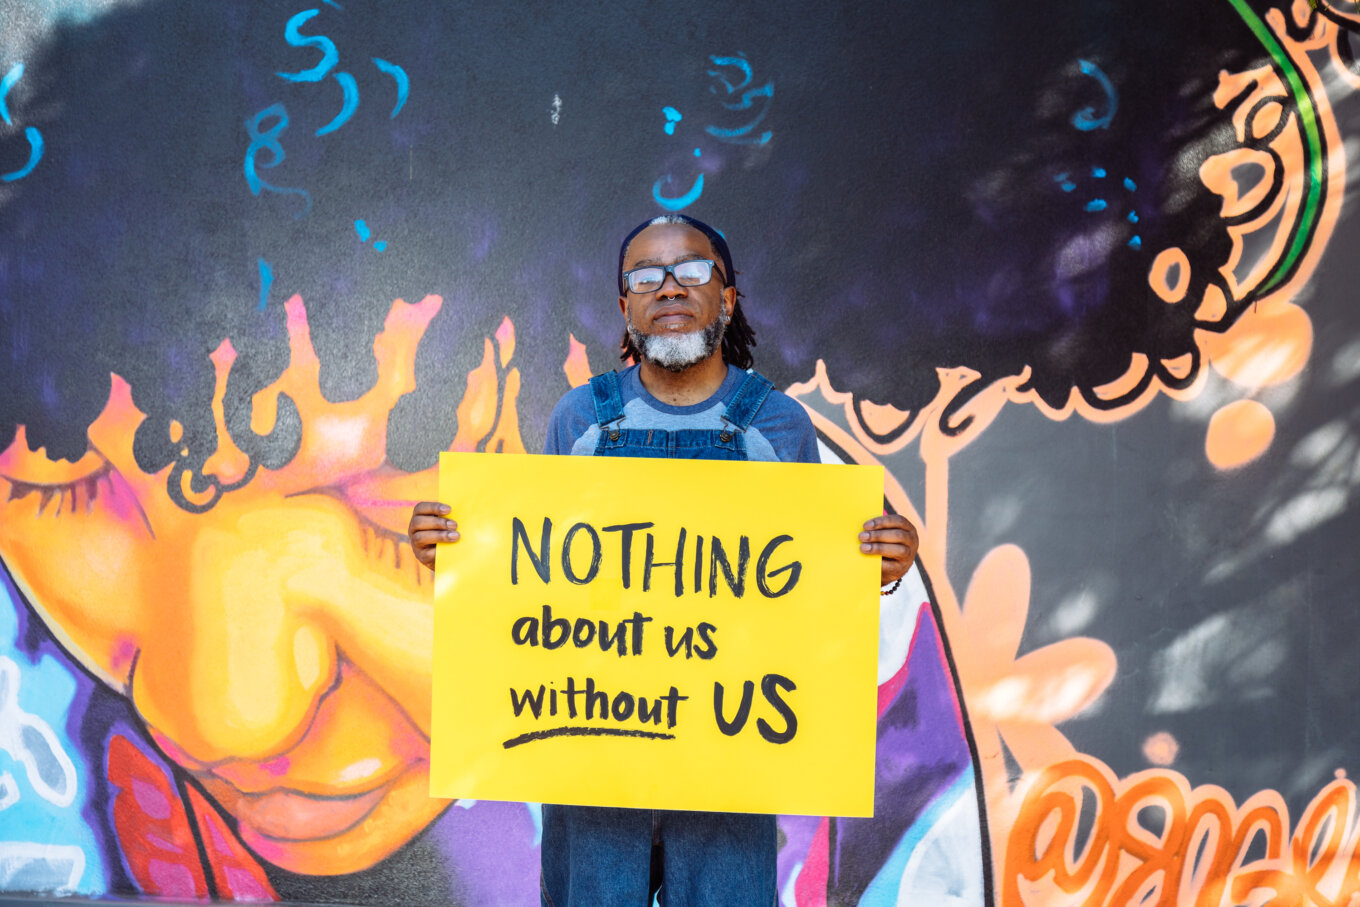 A Deaf Black man wearing glasses looks neutrally at the camera while holding a hand lettered sign declaring “NOTHING about us without US”.